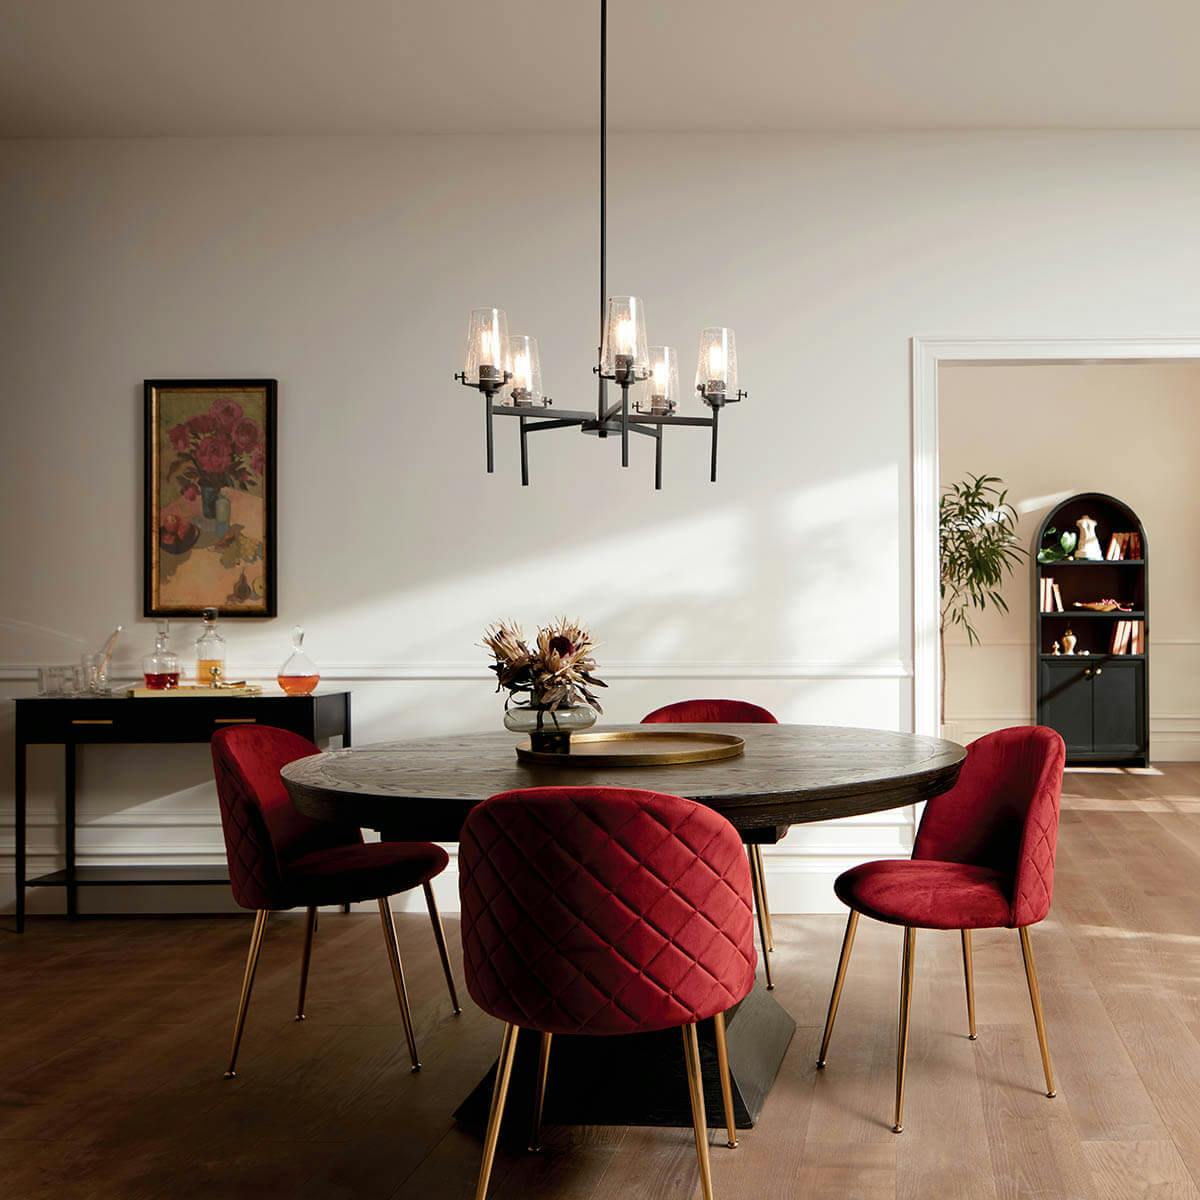 Day time dining room with Alton chandelier in black